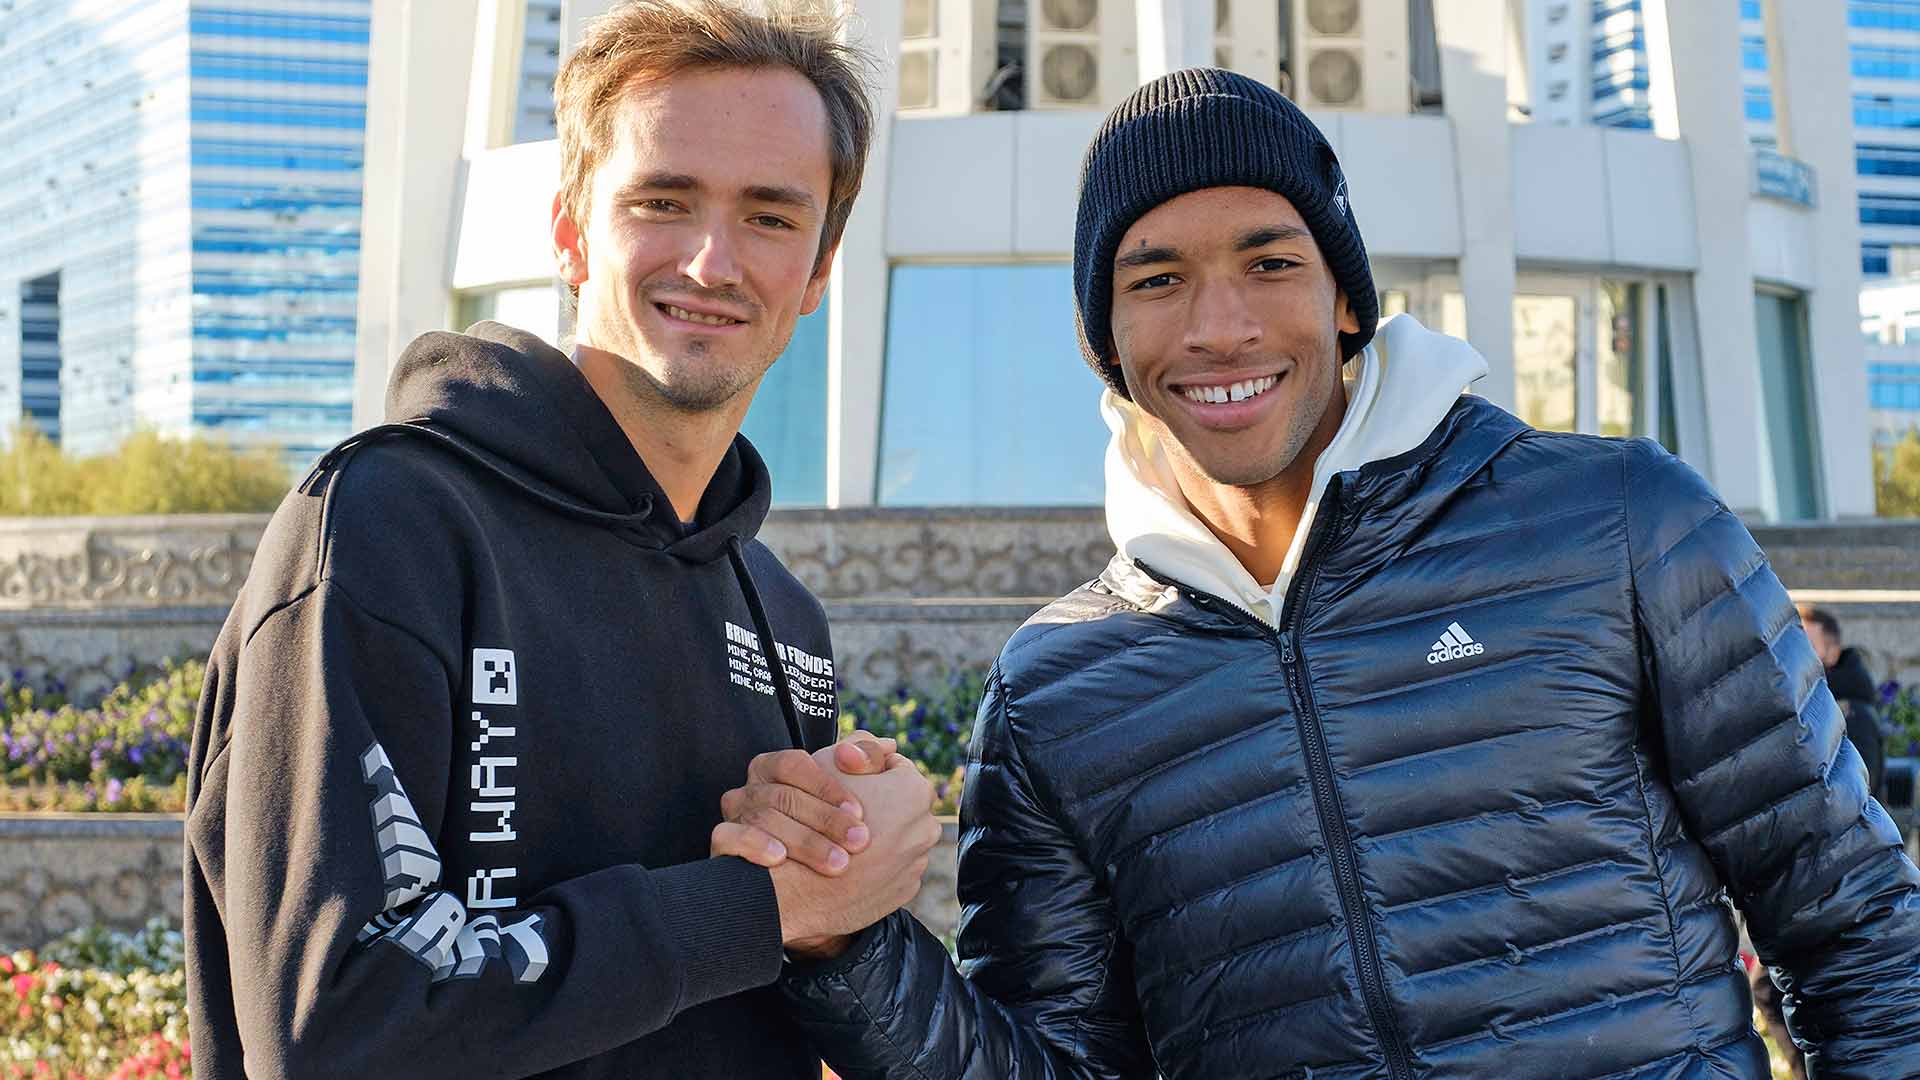 Daniil Medvedev and Felix Auger-Aliassime are both making their debut in Astana.